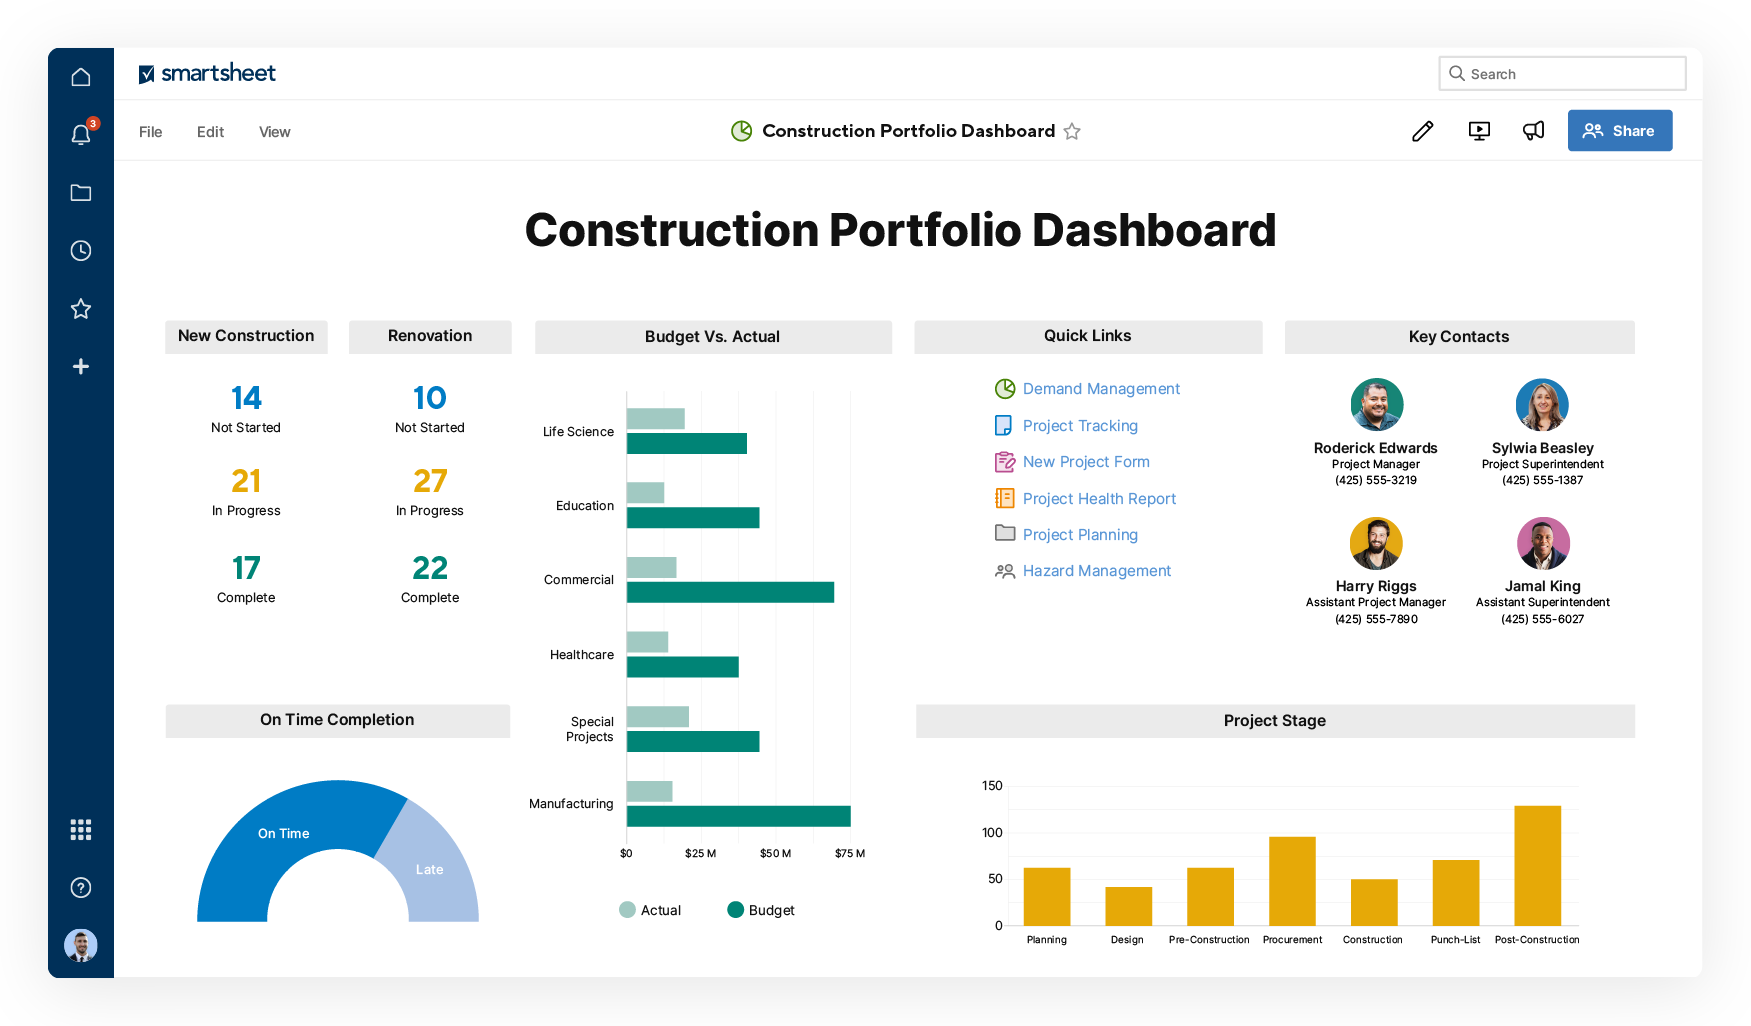 Improve visibility and collaboration across teams with Smartsheet construction templates